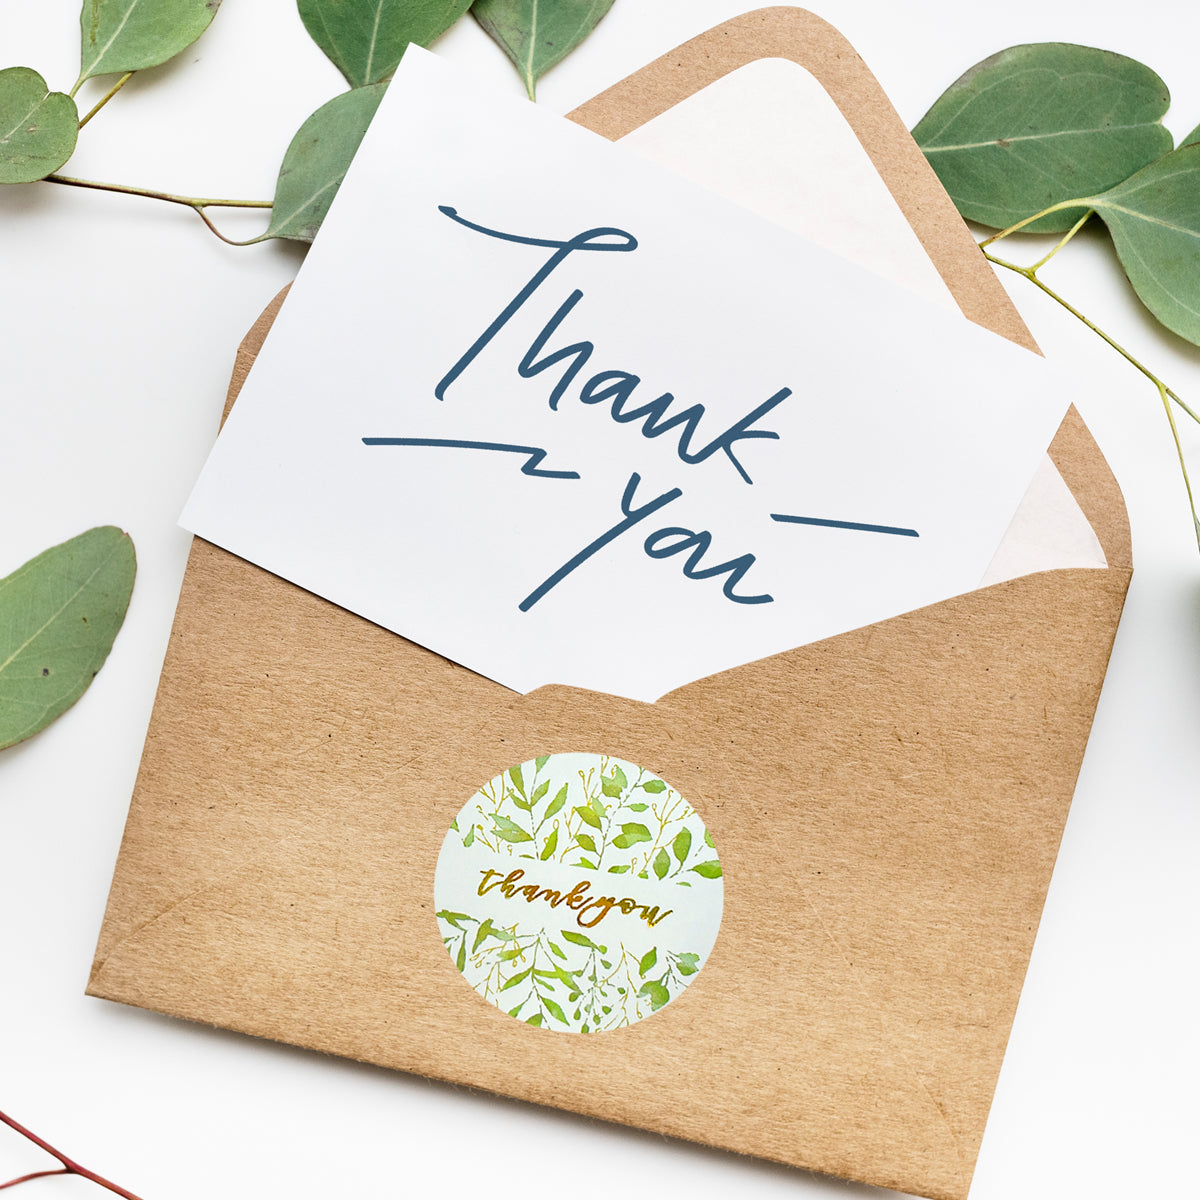 Wrapables 1.5 / 2 Thank You Stickers Roll, Sealing Stickers and Labels for Boxes, Envelopes, Bags, Small Businesses, Weddings, Parties (500pcs)